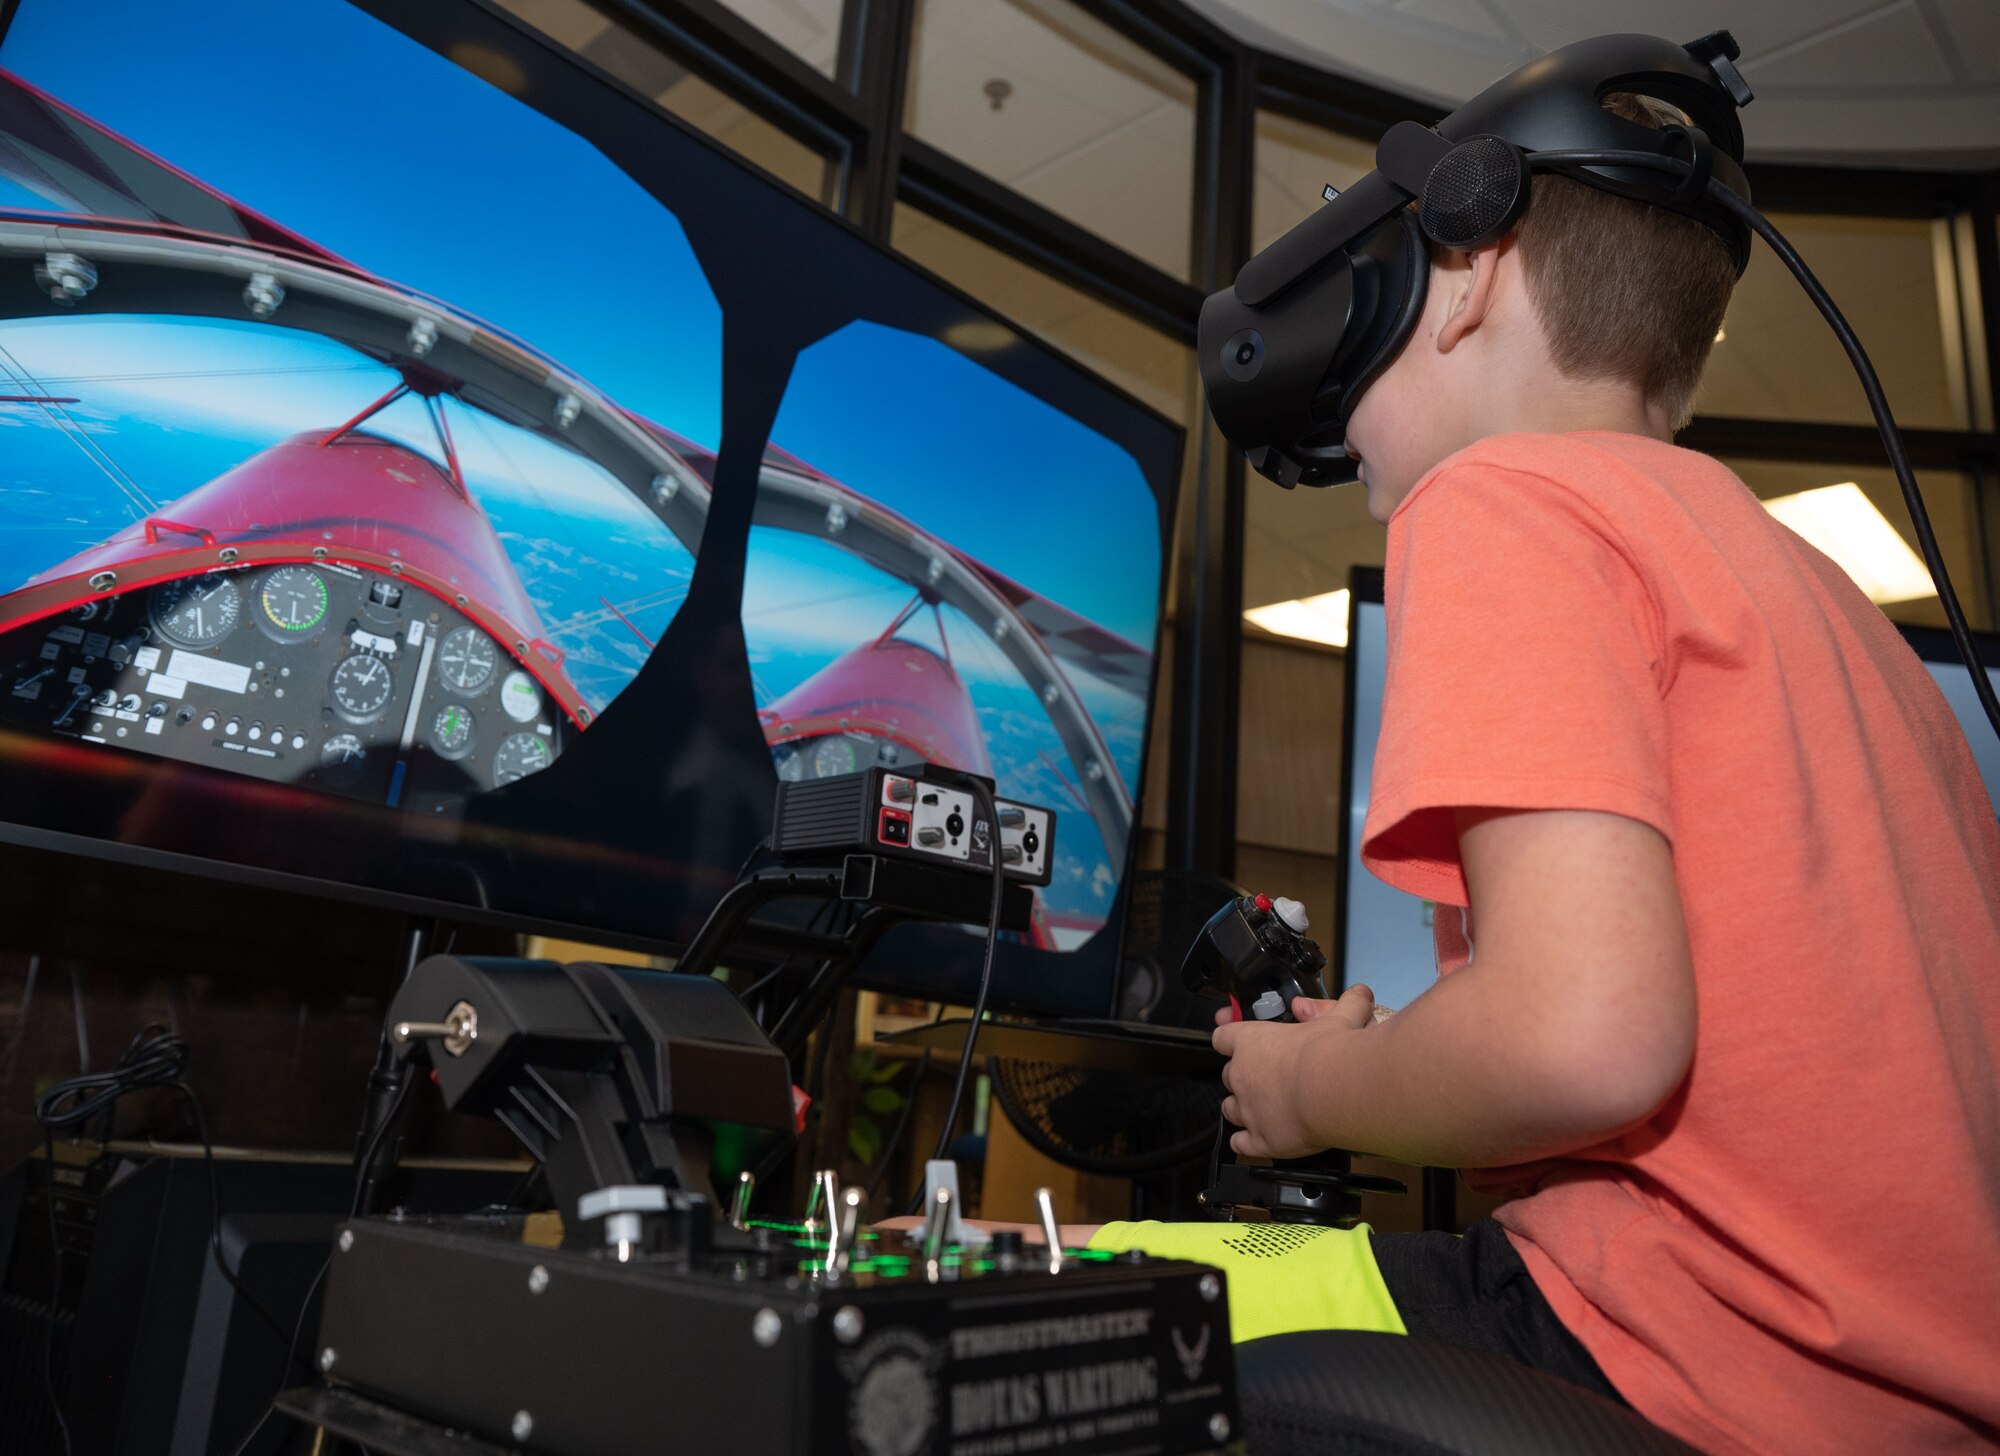 A child wearing virtual reality goggles holds a joystick on a flight simulator while watching two screens.